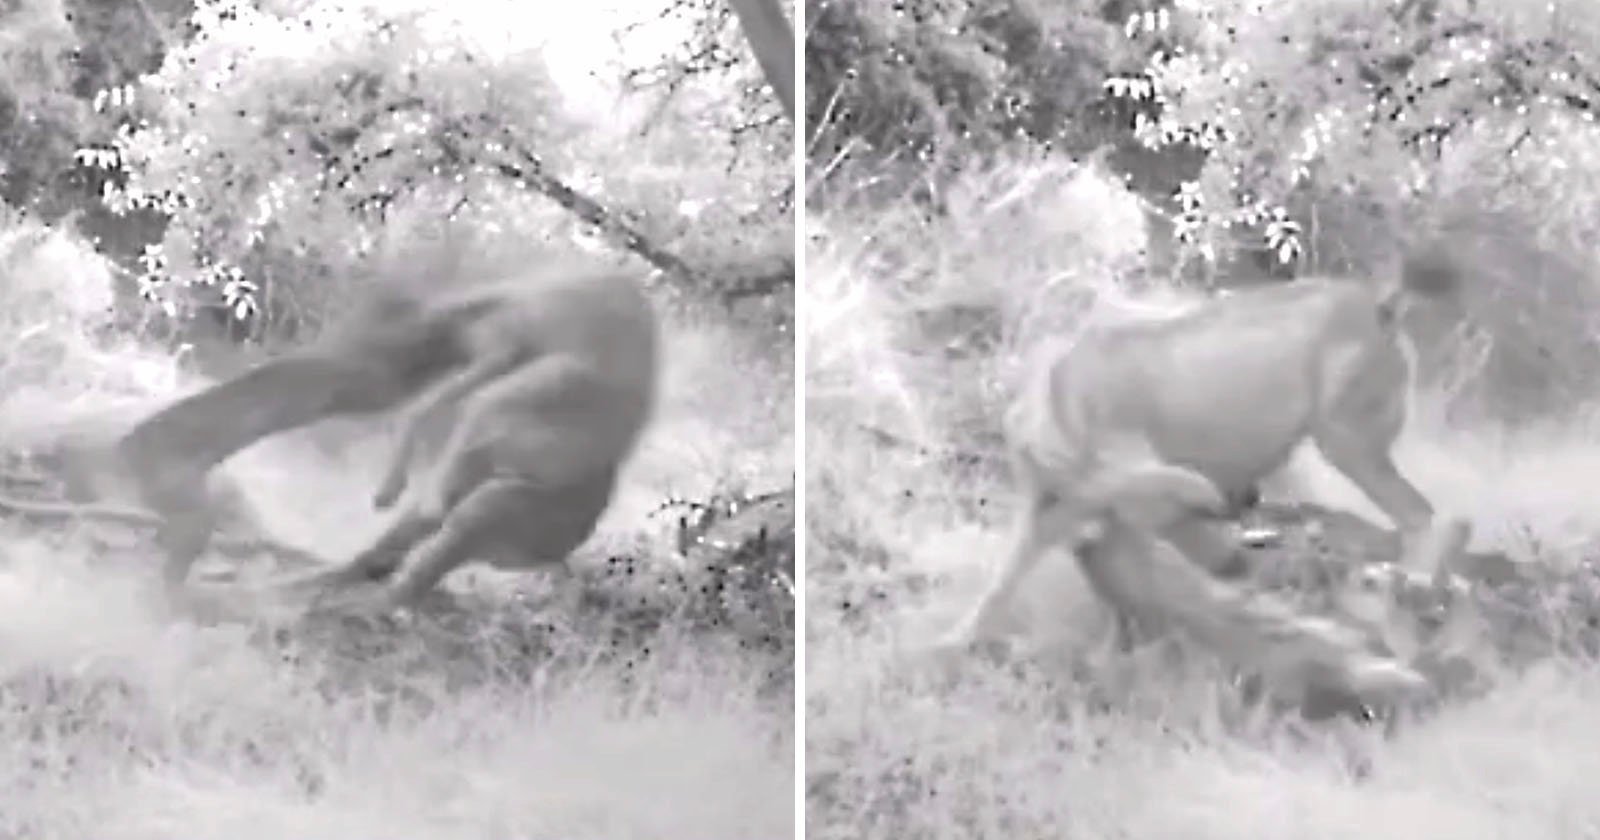 Savage Battle Between Bobcat and Deer Captured on Trail Cam in Urban Park